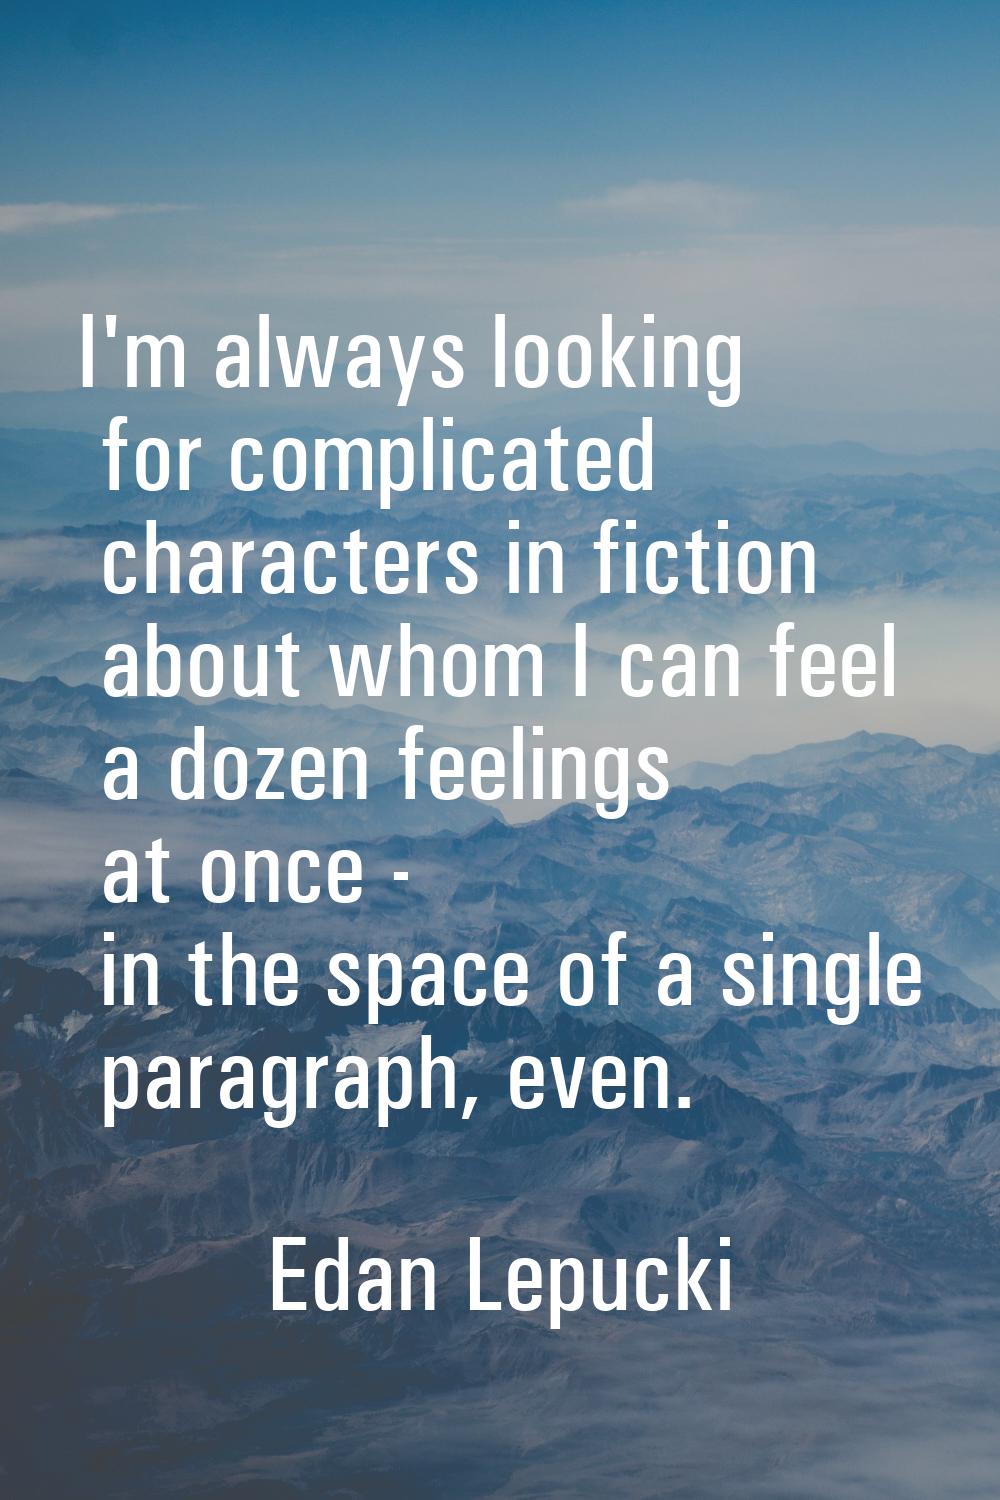 I'm always looking for complicated characters in fiction about whom I can feel a dozen feelings at 